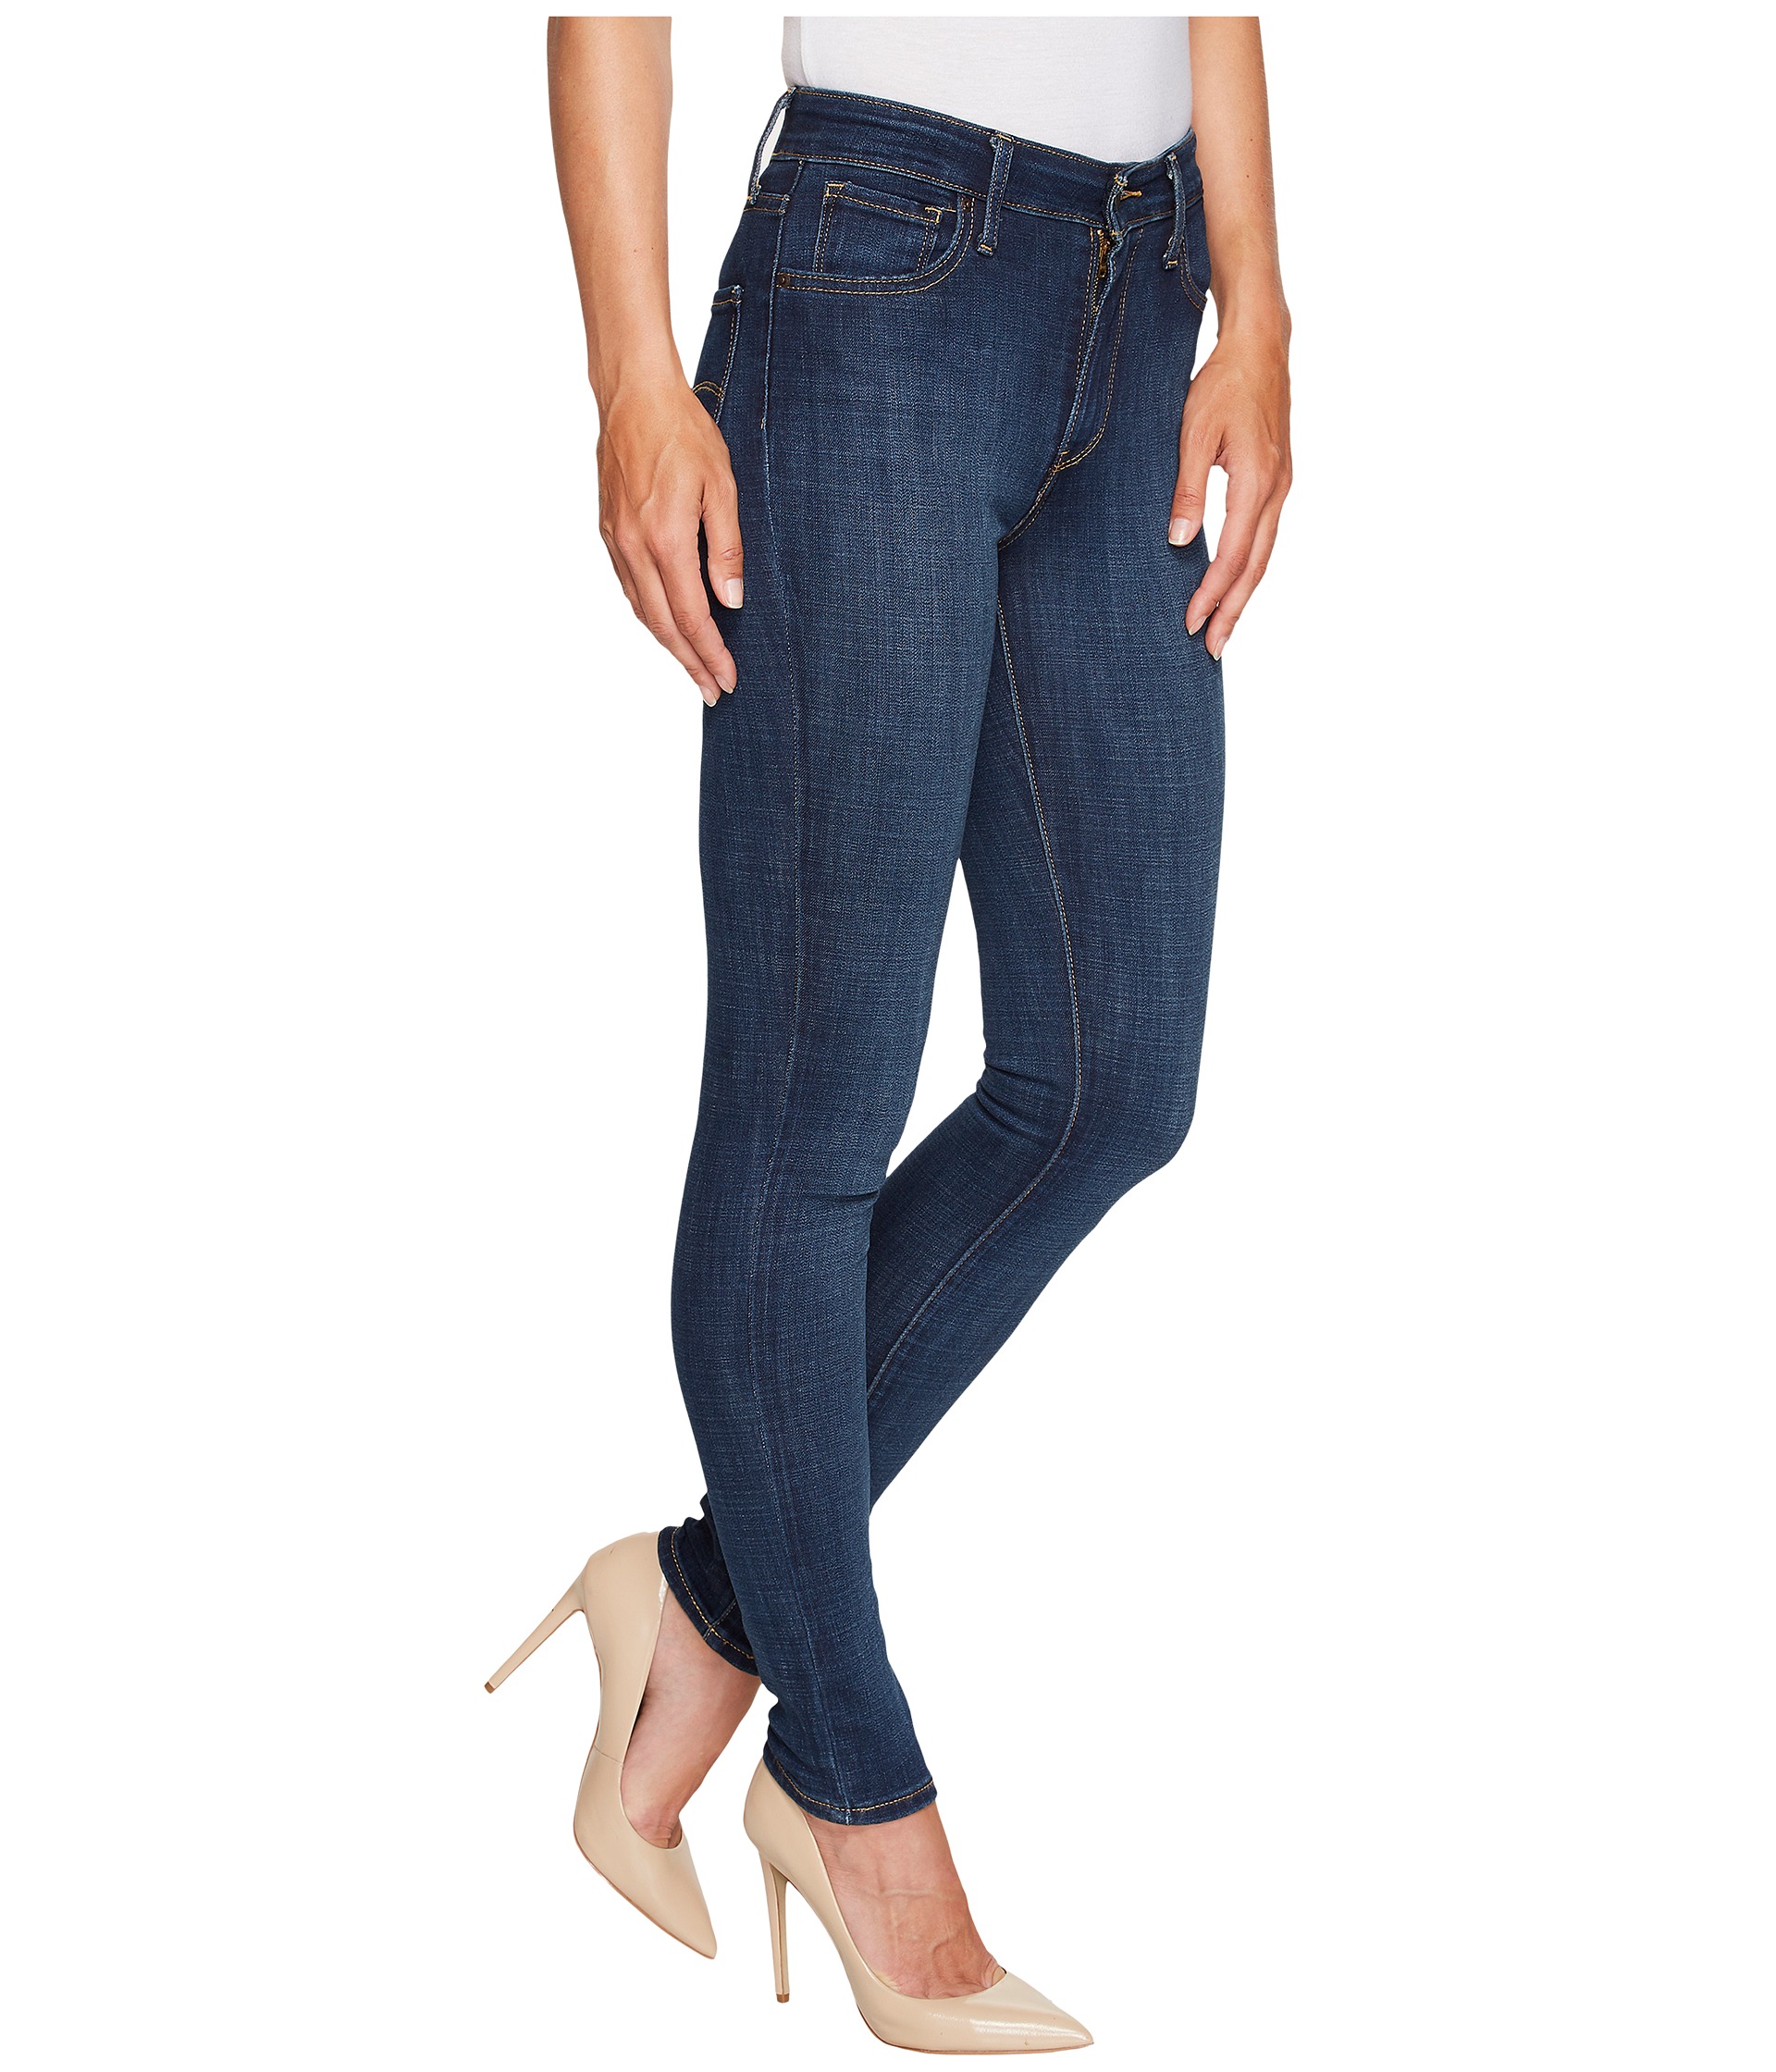 Levi's® Womens 721 High Rise Skinny at Zappos.com